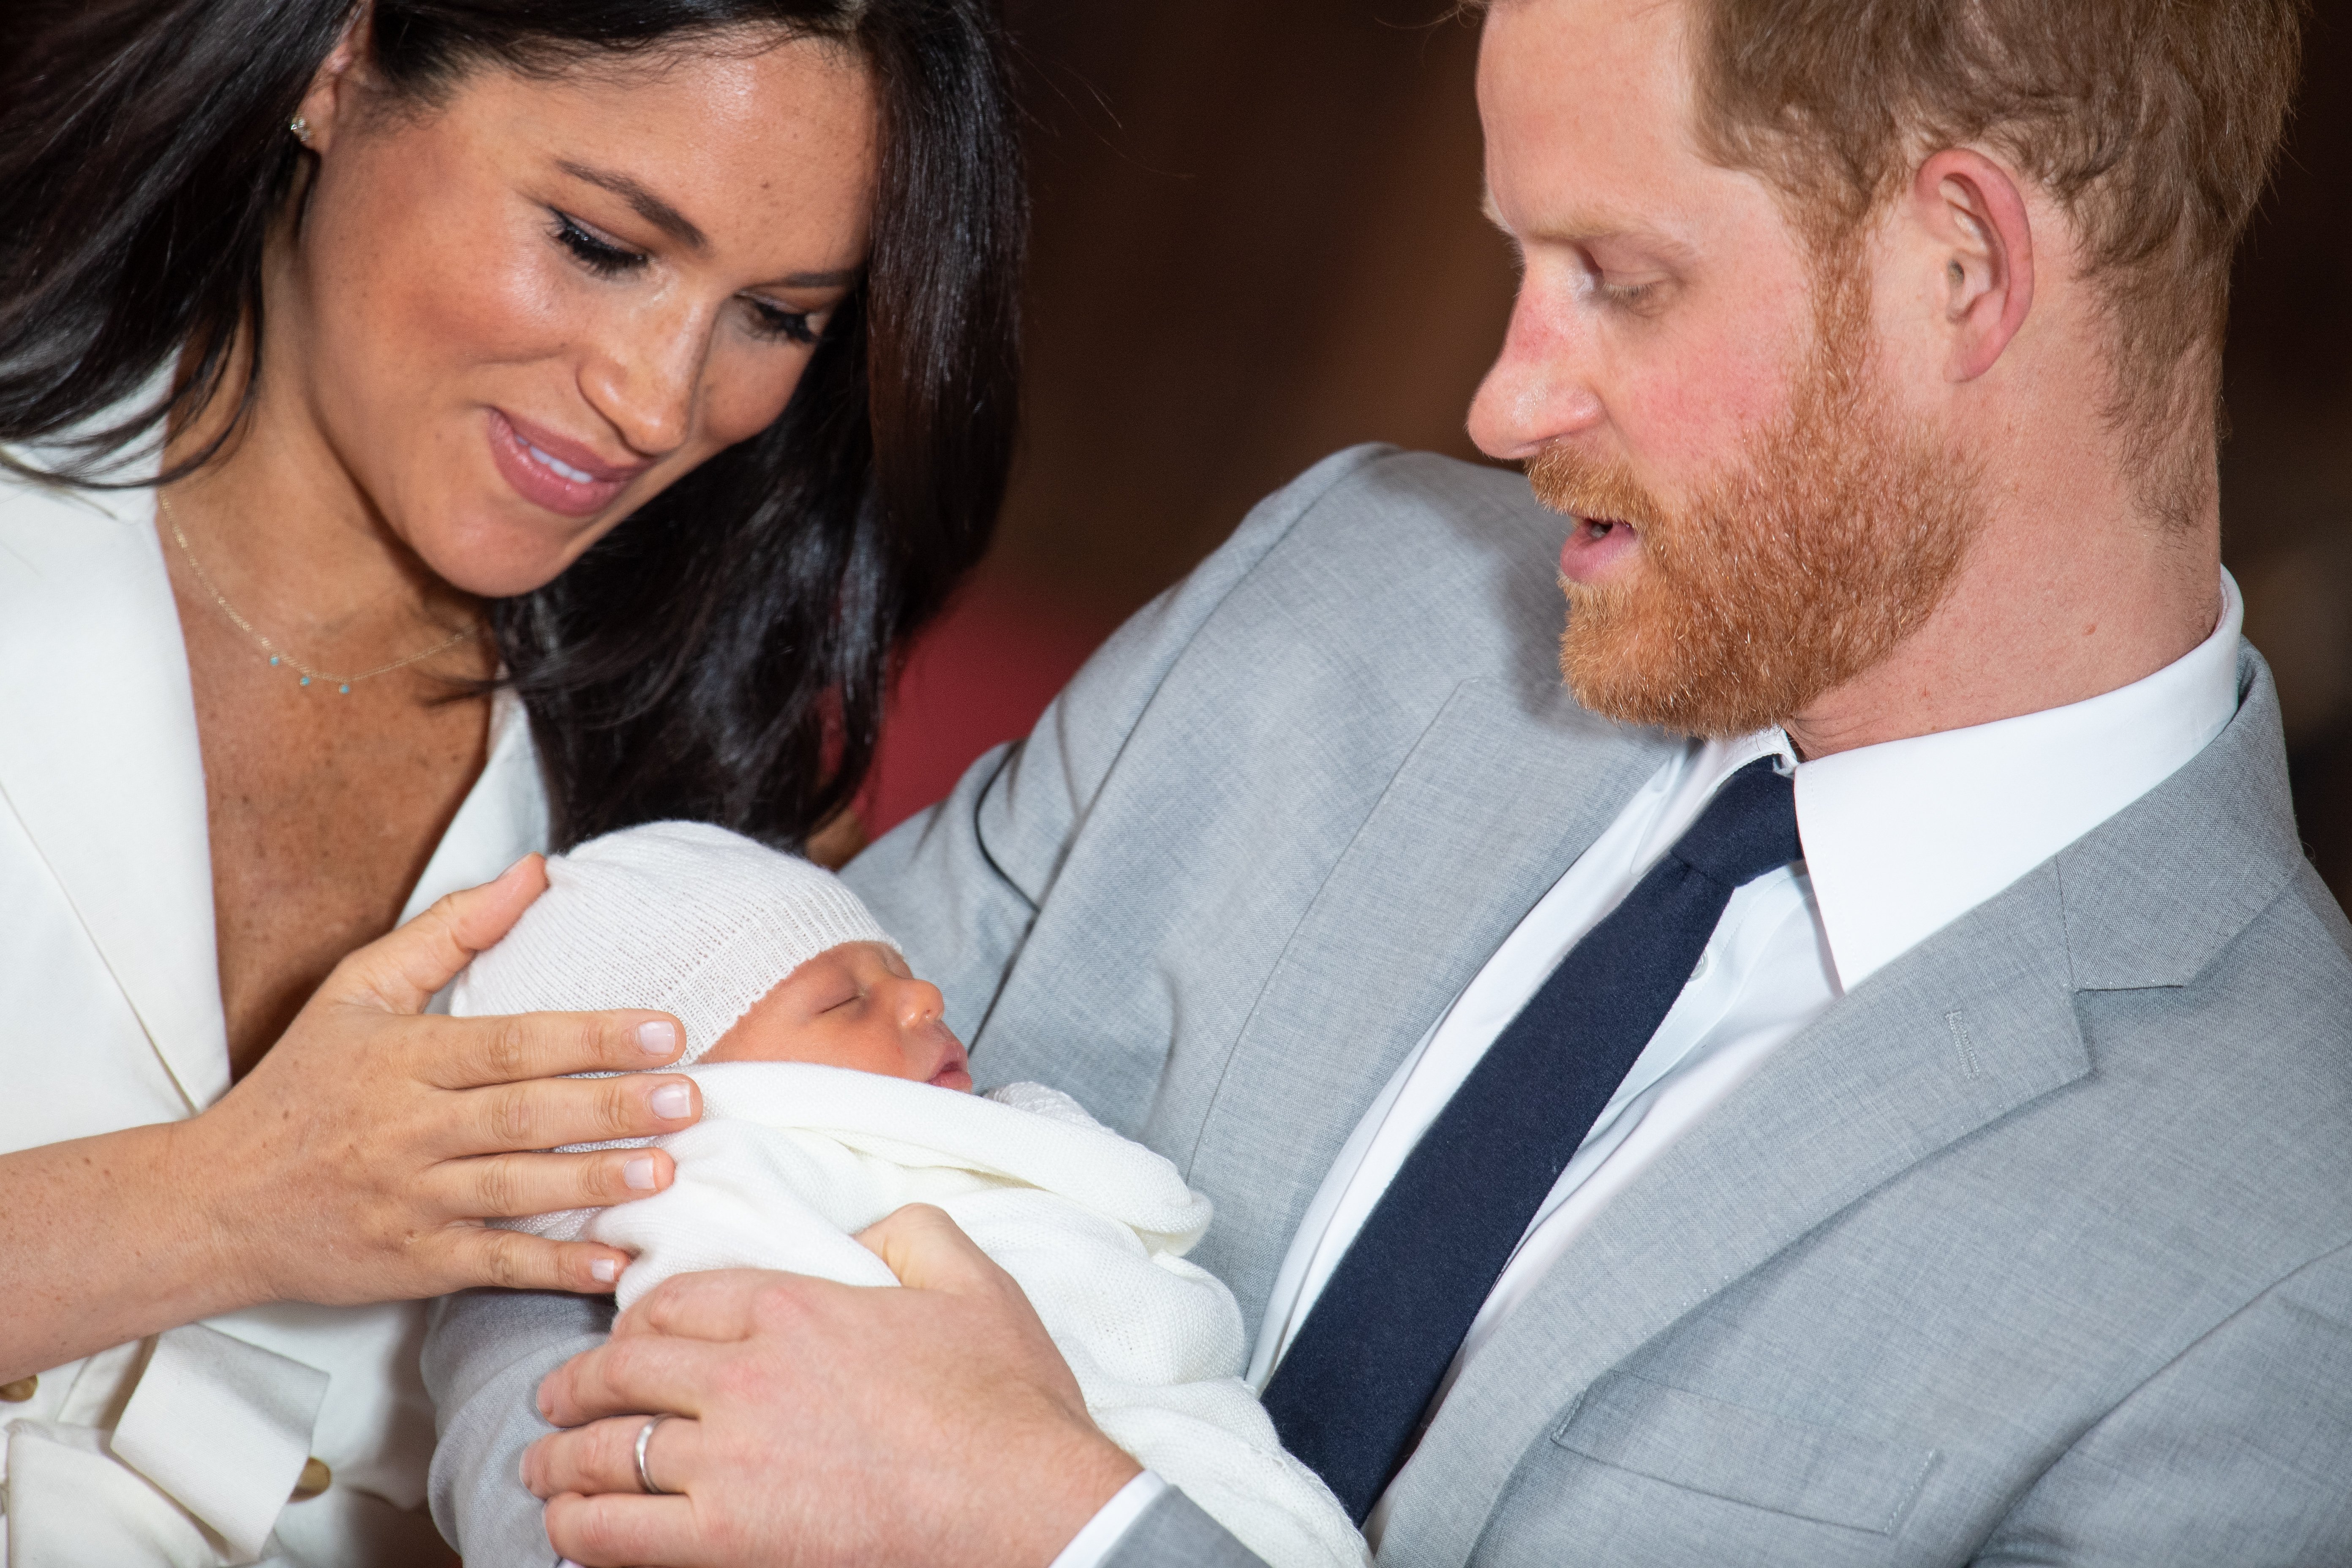 Prince Harry, Duke of Sussex and Meghan, Duchess of Sussex, pose with their newborn son Archie Harrison Mountbatten-Windsor during a photocall in St George's Hall at Windsor Castle on May 8, 2019. | Photo: GettyImages